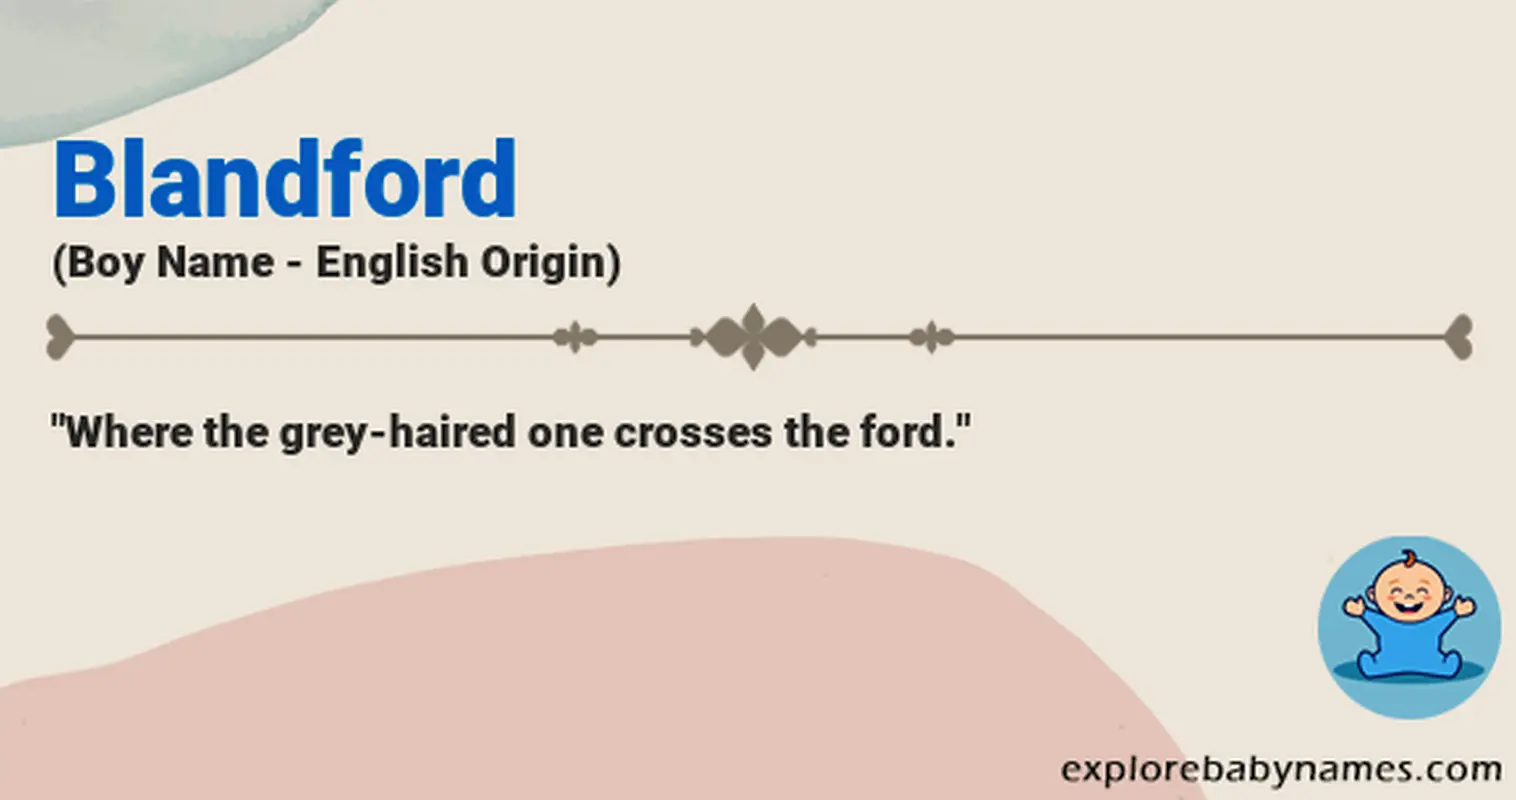 Meaning of Blandford